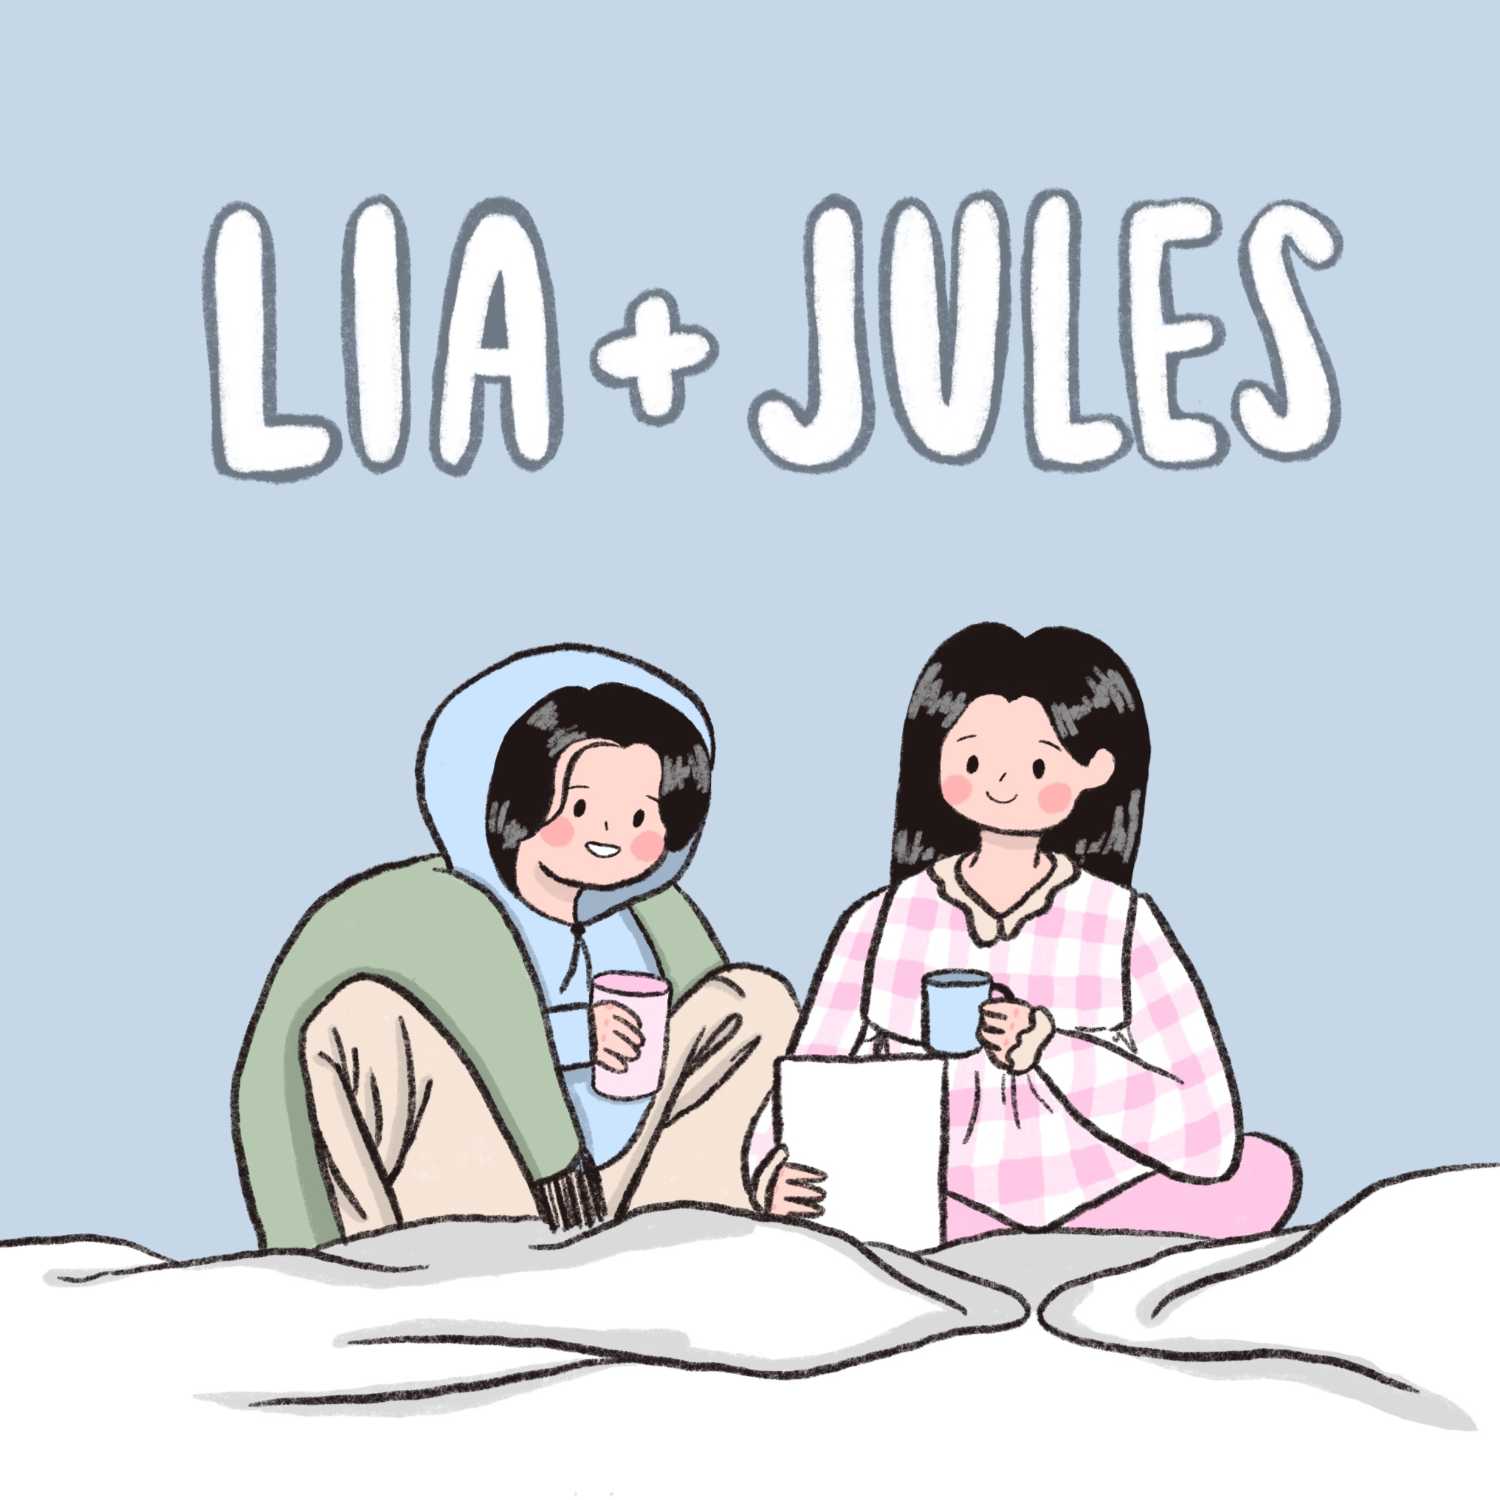 Lia and Jules